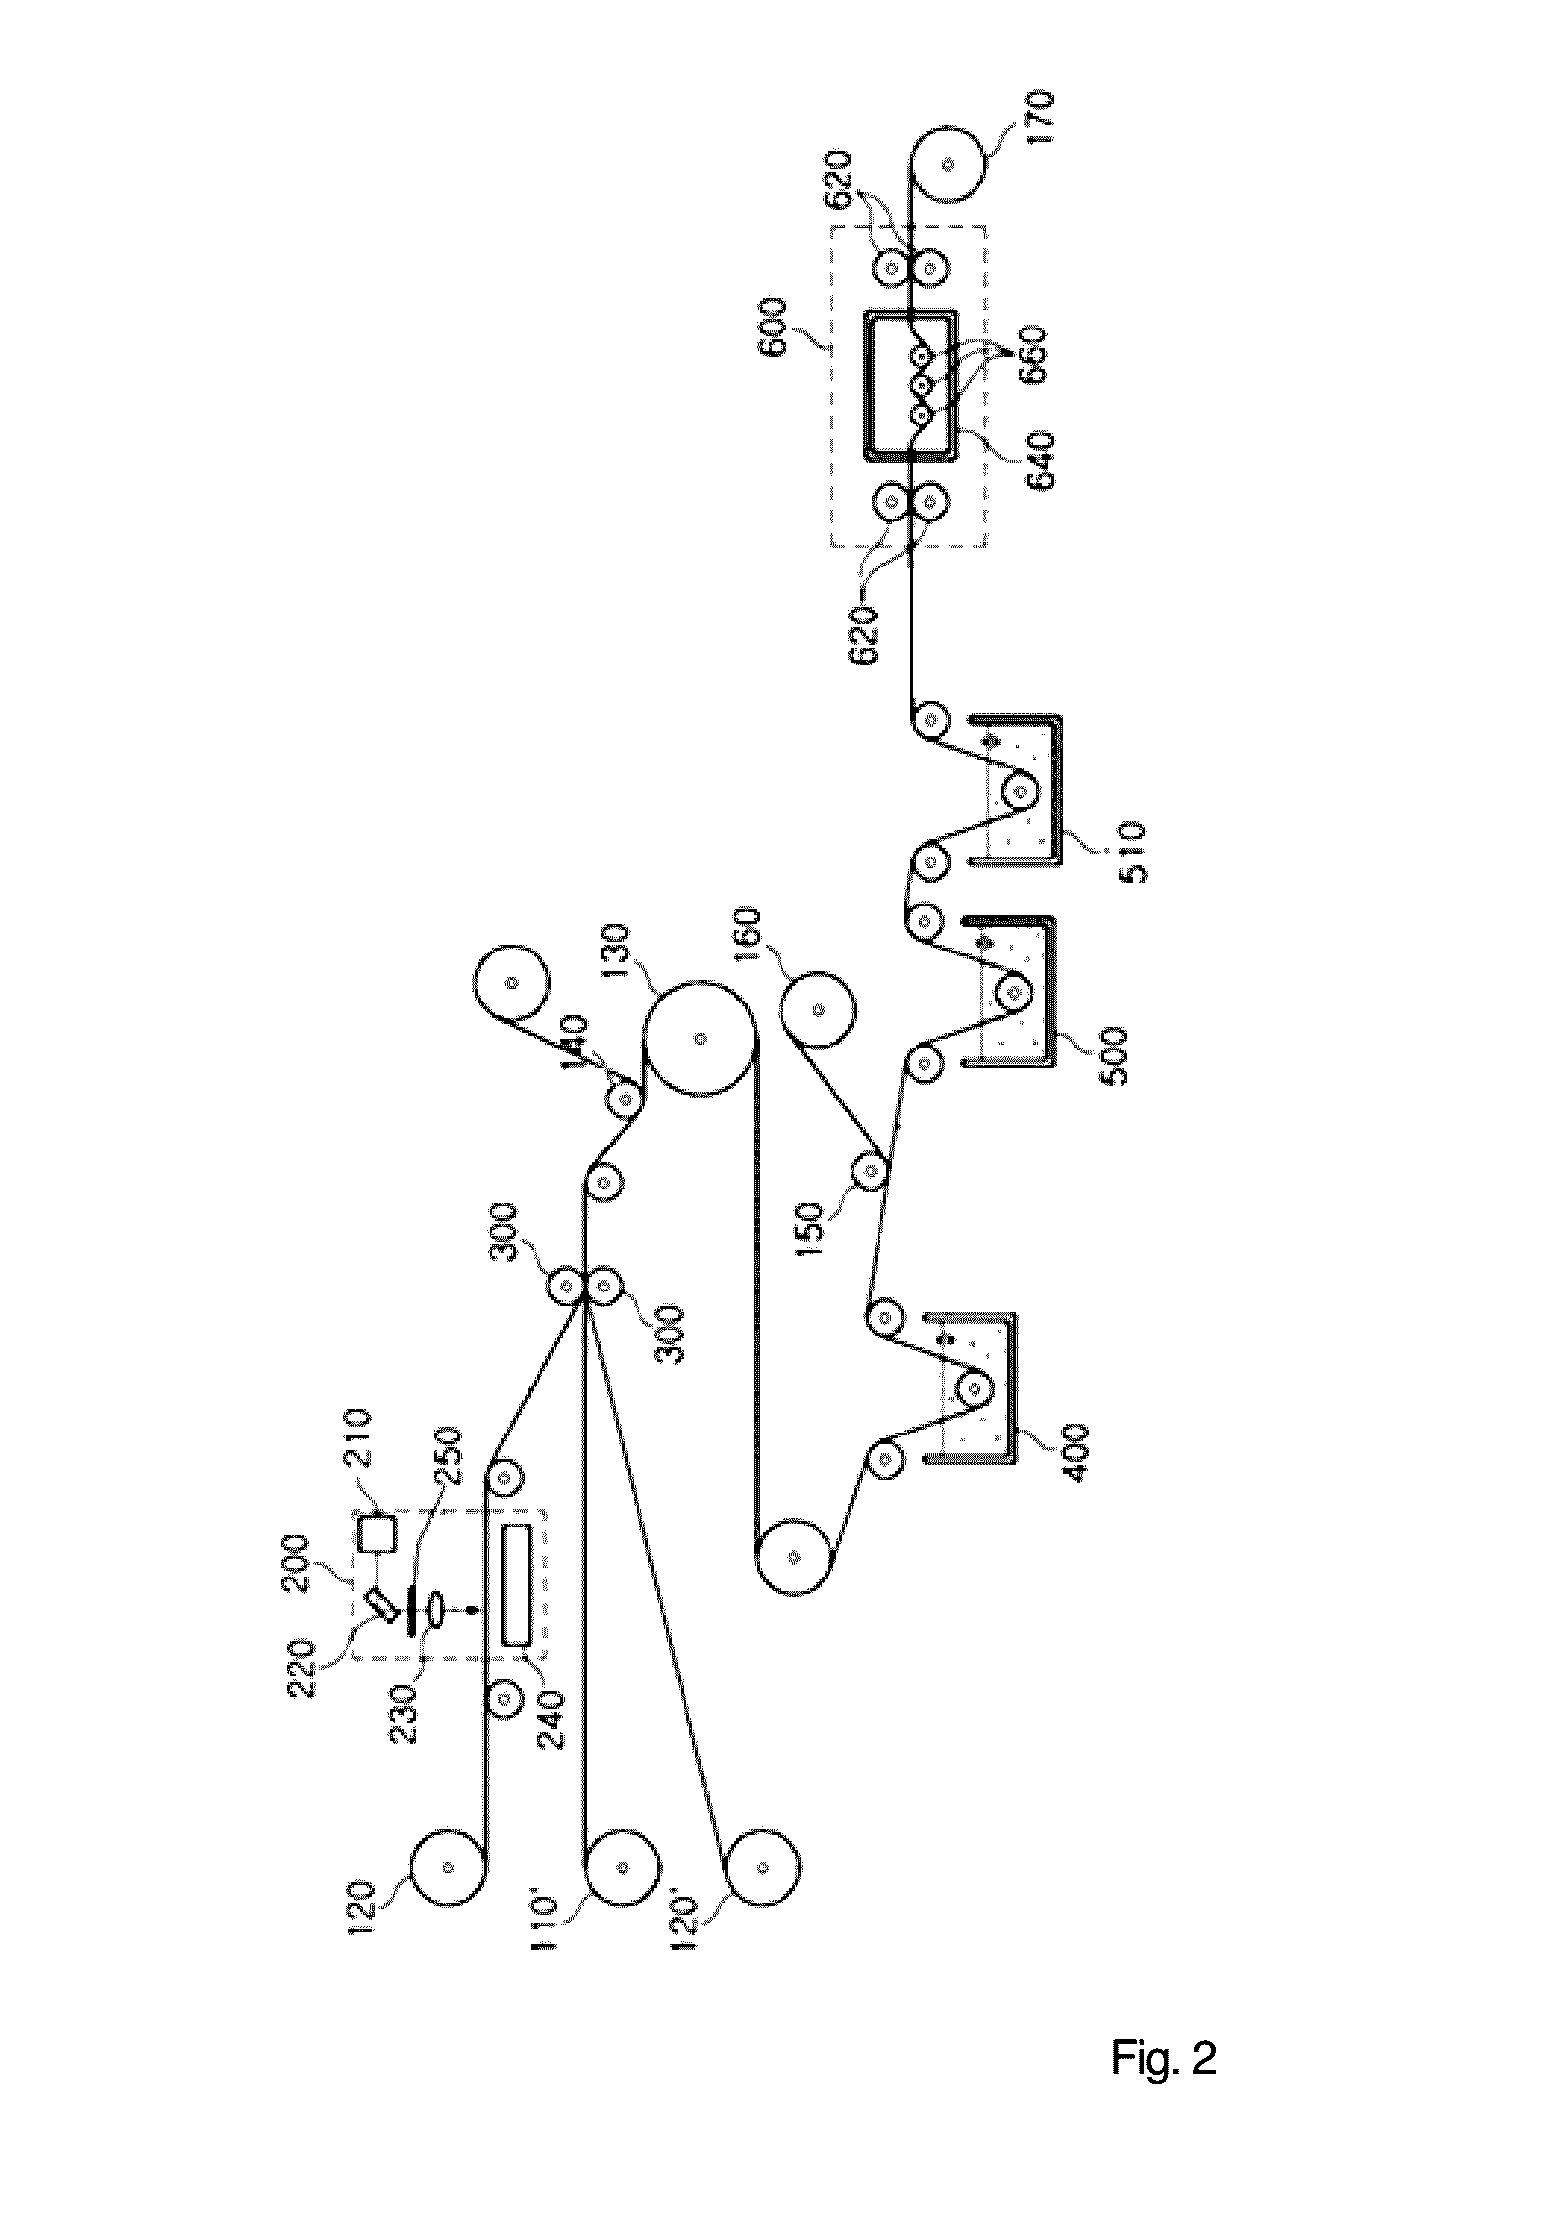 Methods for manufacturing polarizing element, polarizing element roll and single sheet type polarizing element having local bleaching areas (as amended)